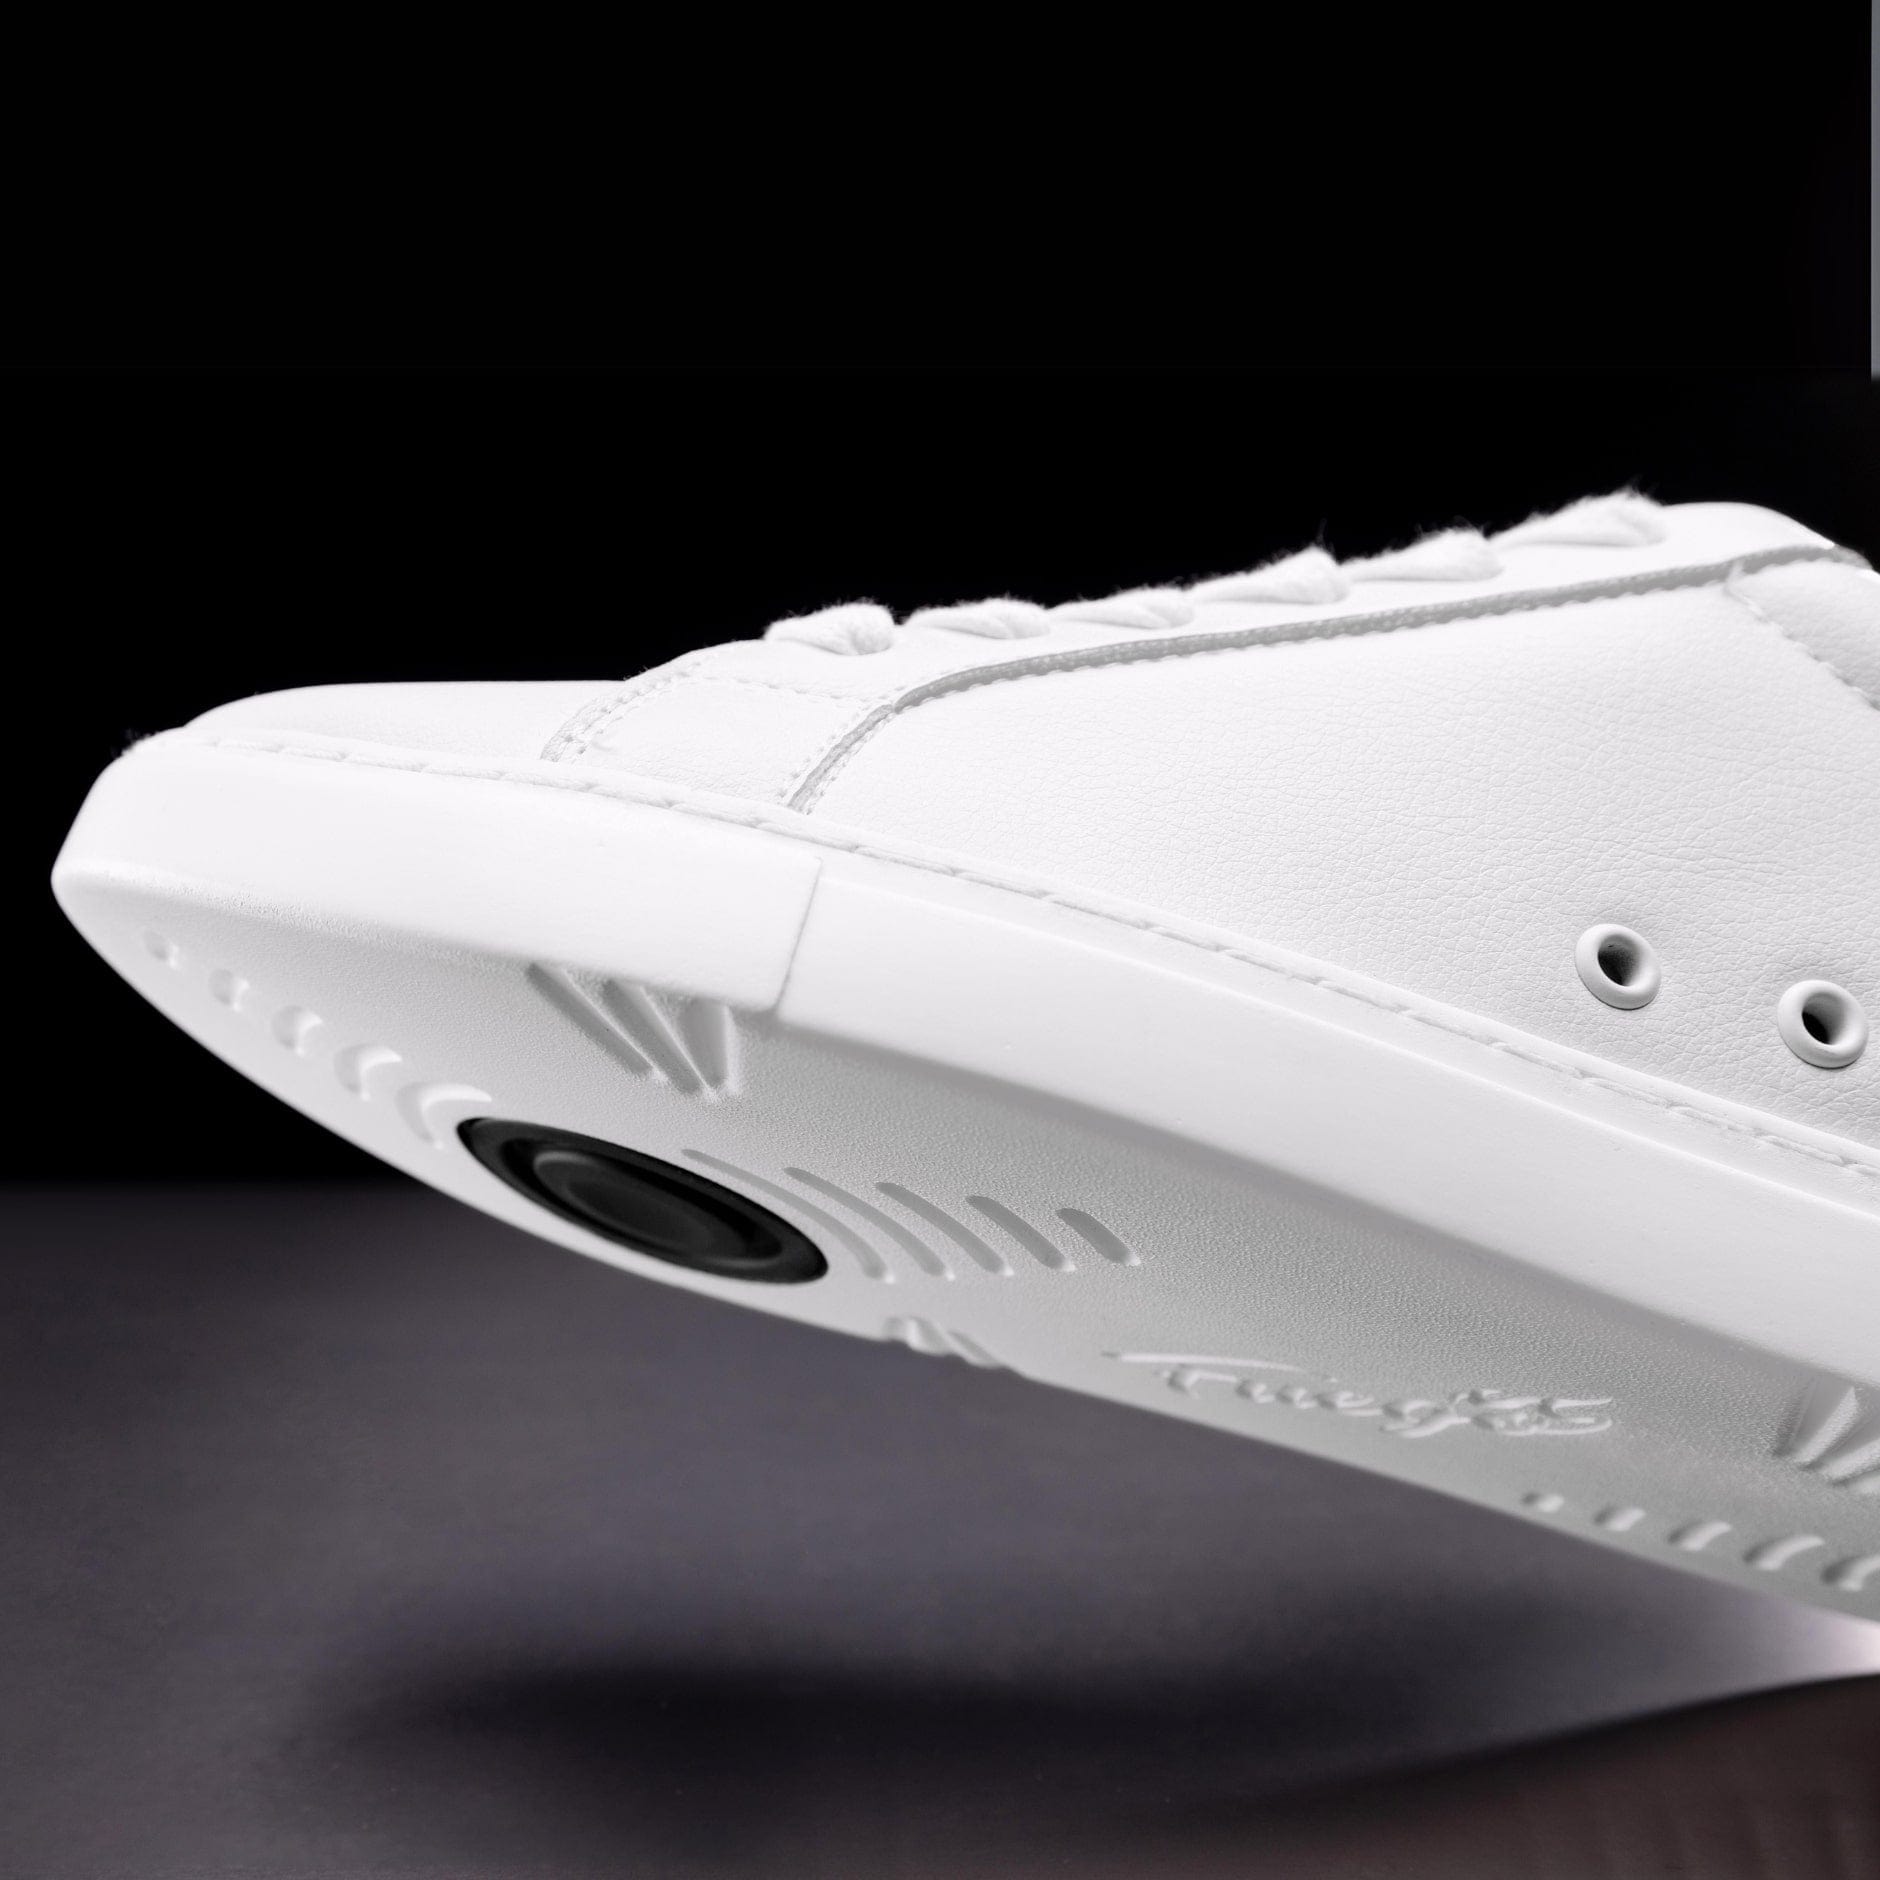 Fuego Sneakers White | Low-top